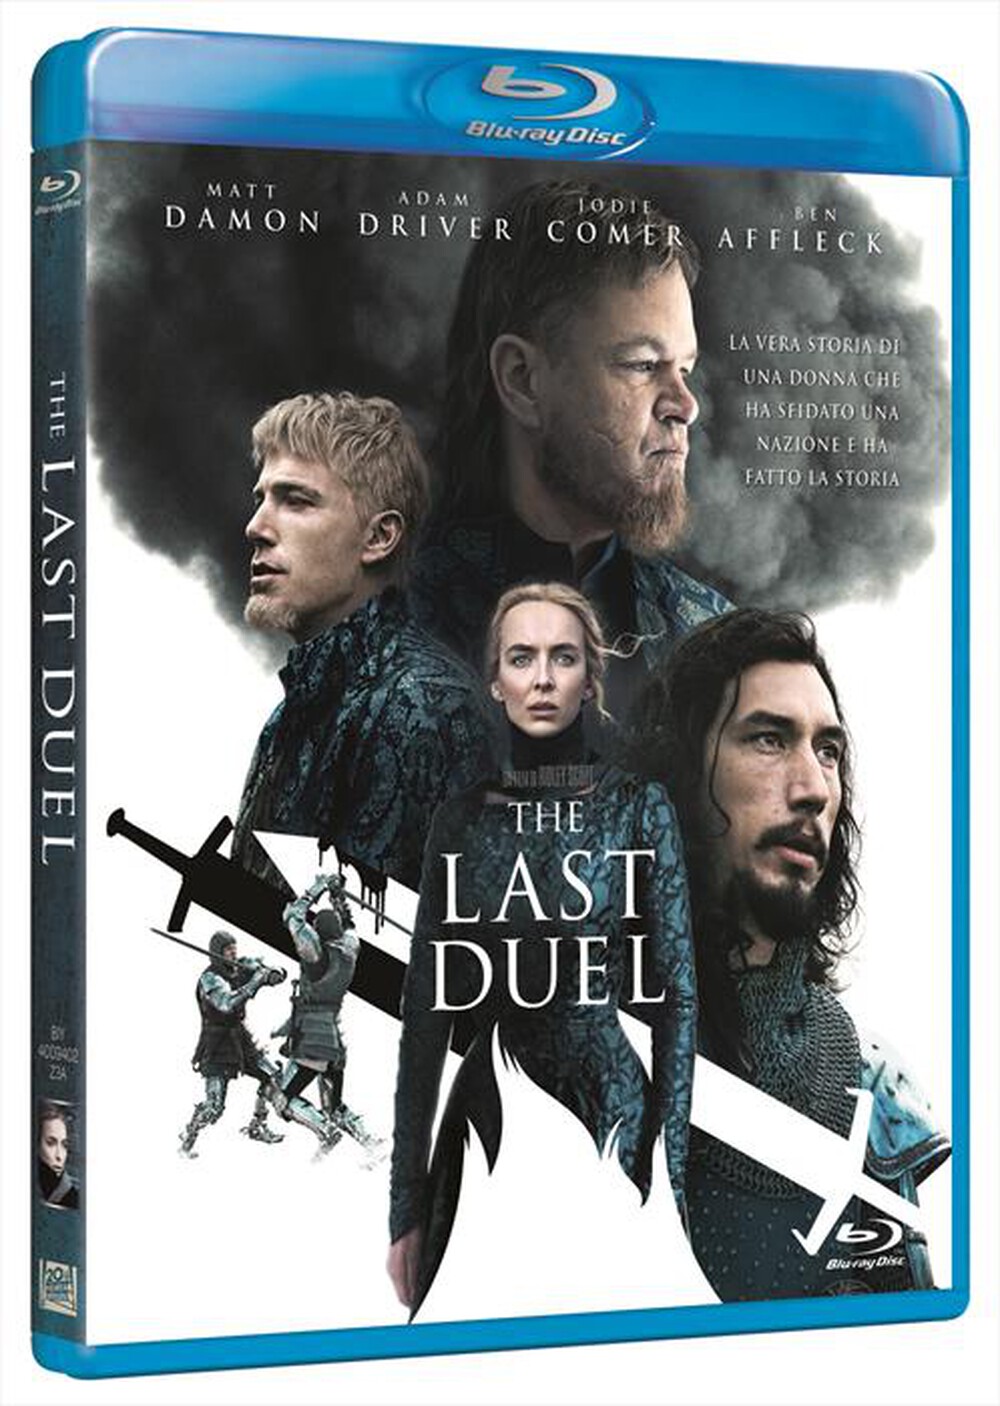 "EAGLE PICTURES - Last Duel (The)"